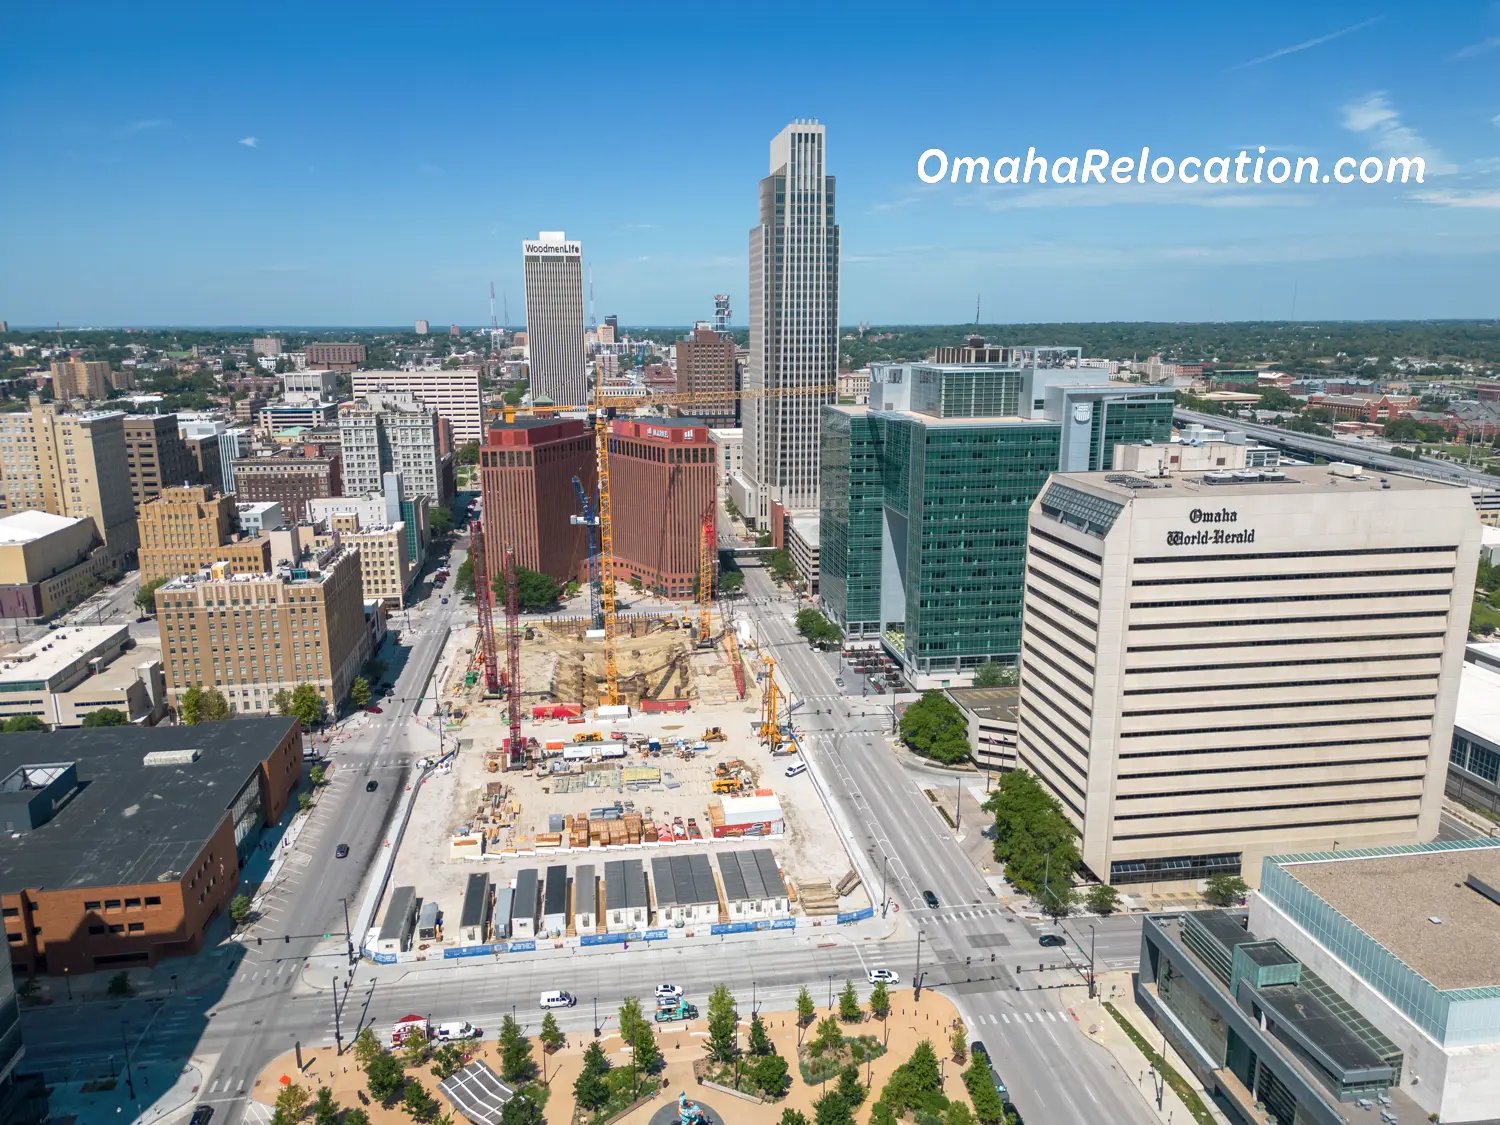 Construction on new Mutual of Omaha headquarters in downtown Omaha